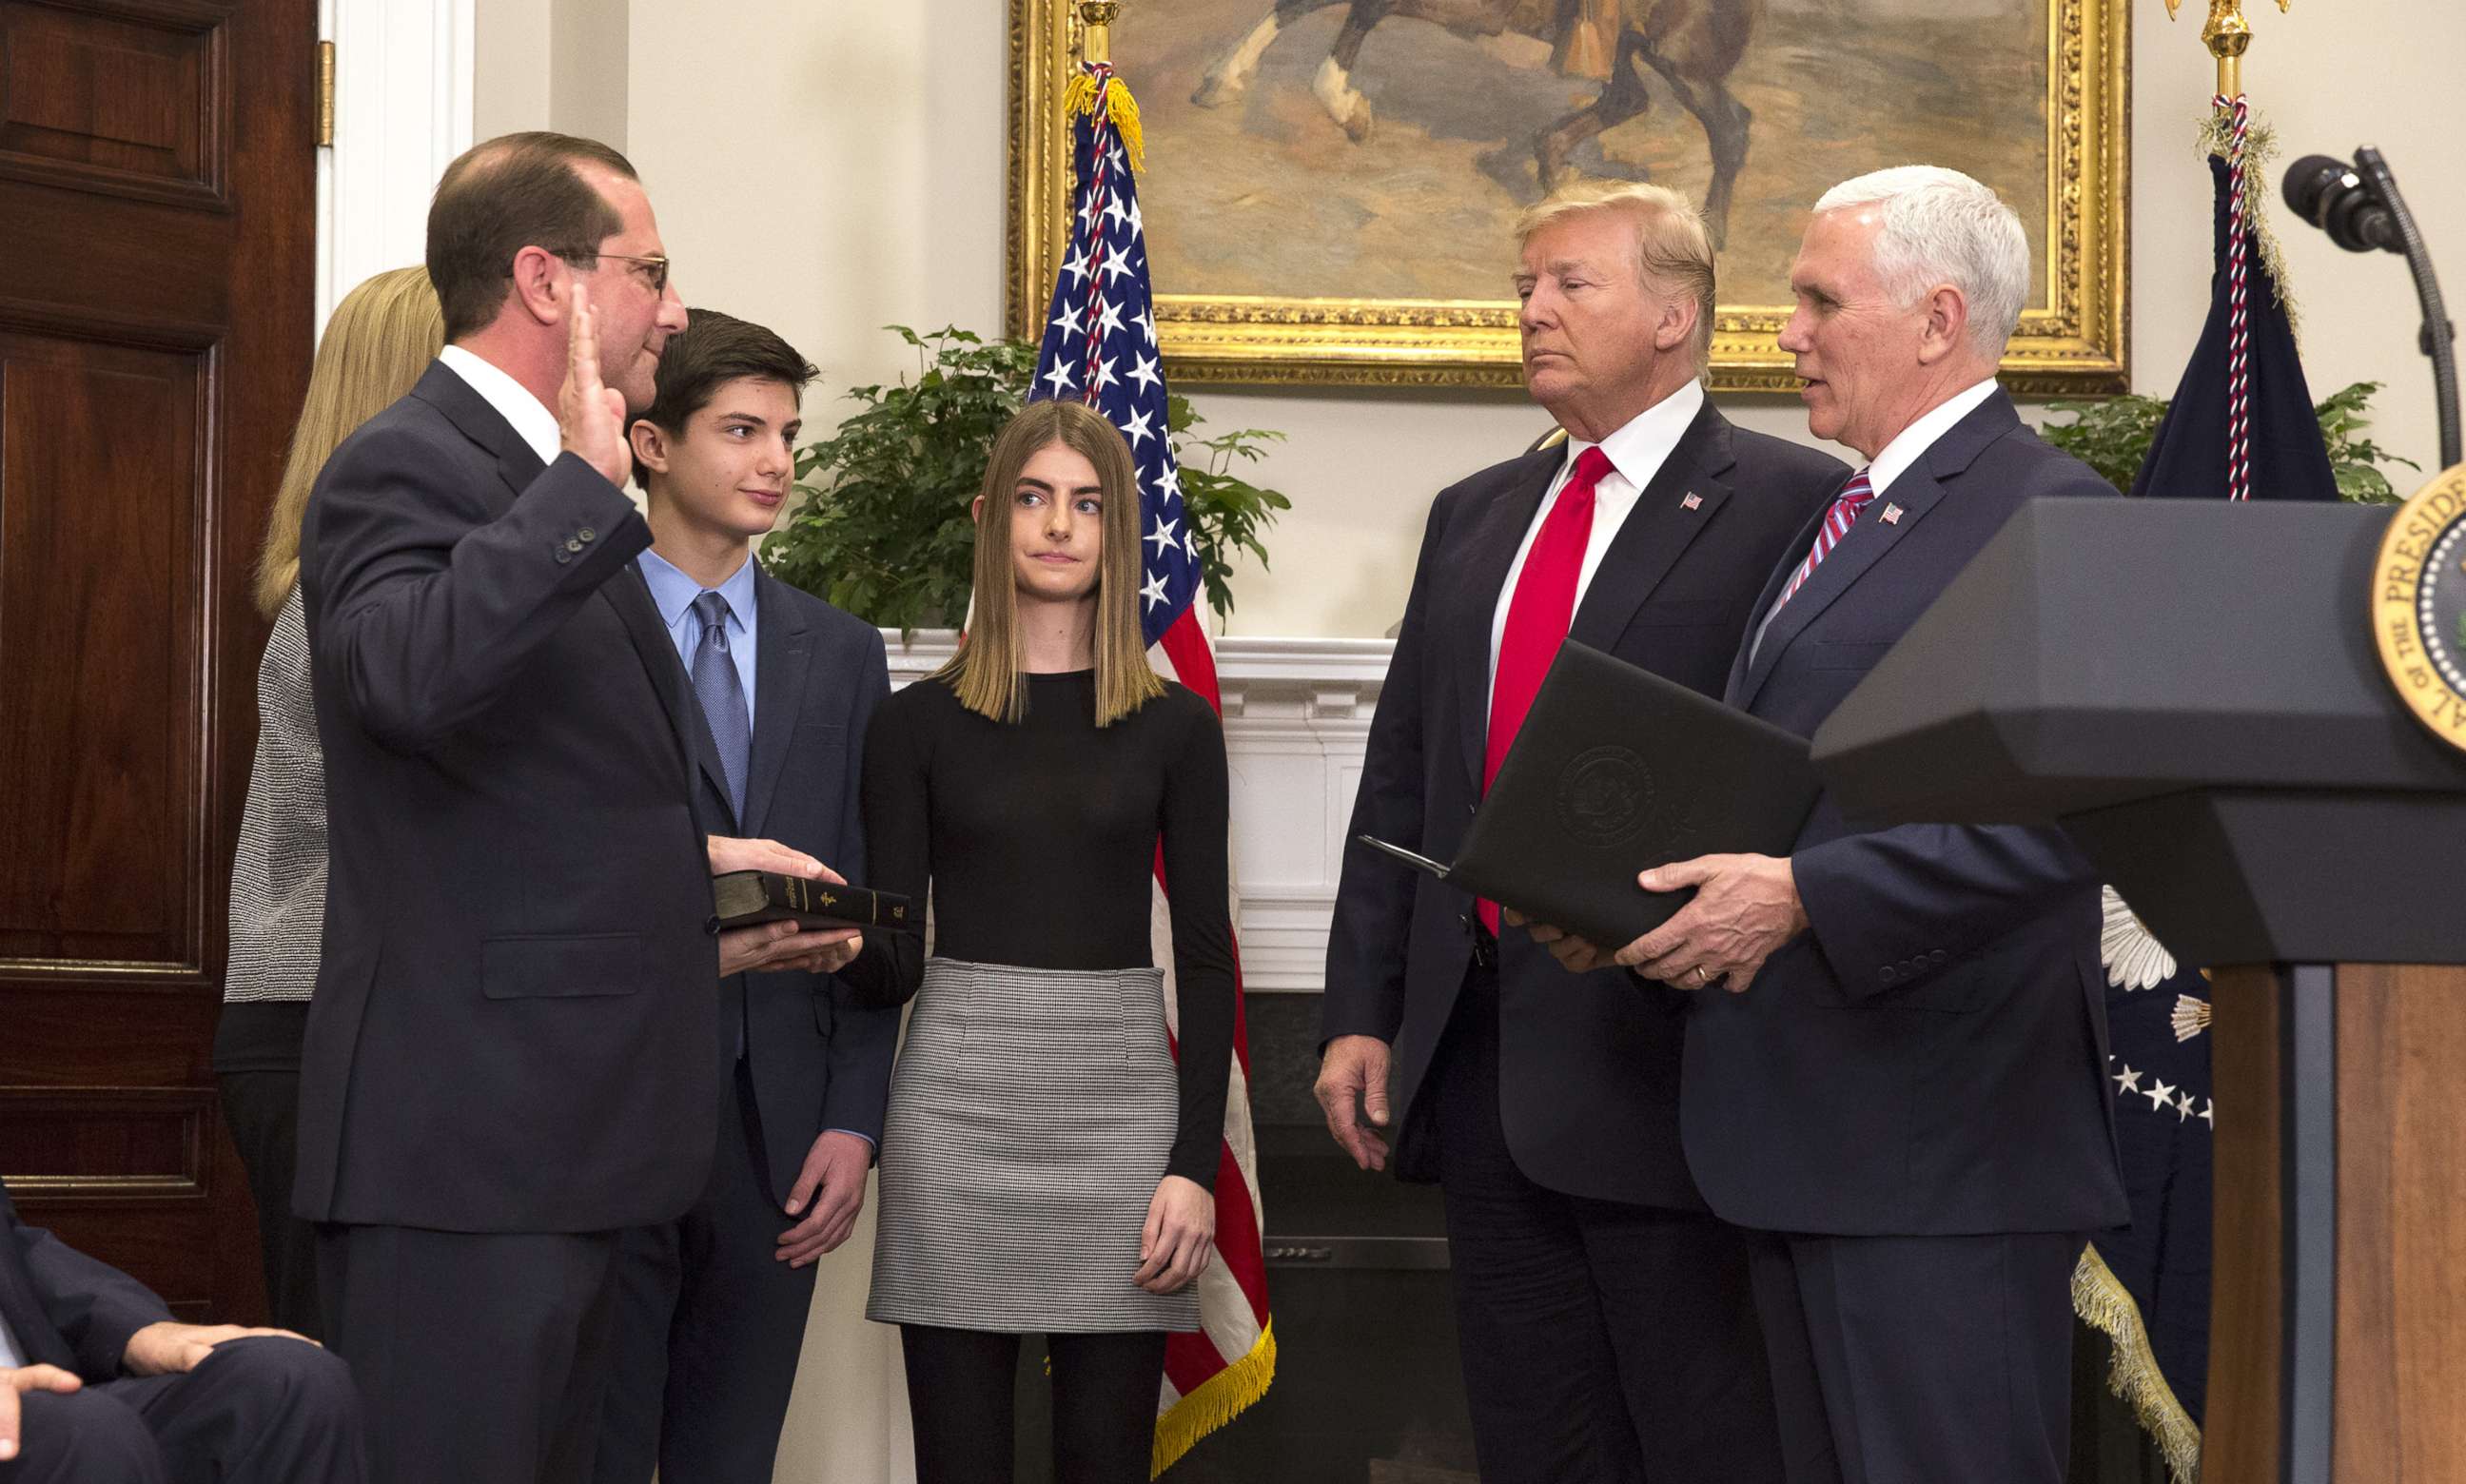 PHOTO: Vice President Mike Pence swears in Alex Azar as the new Secretary of the Department of Health and Human Services with President Donald J. Trump, Jan. 29, 2018 at The White House in Washington, DC. 